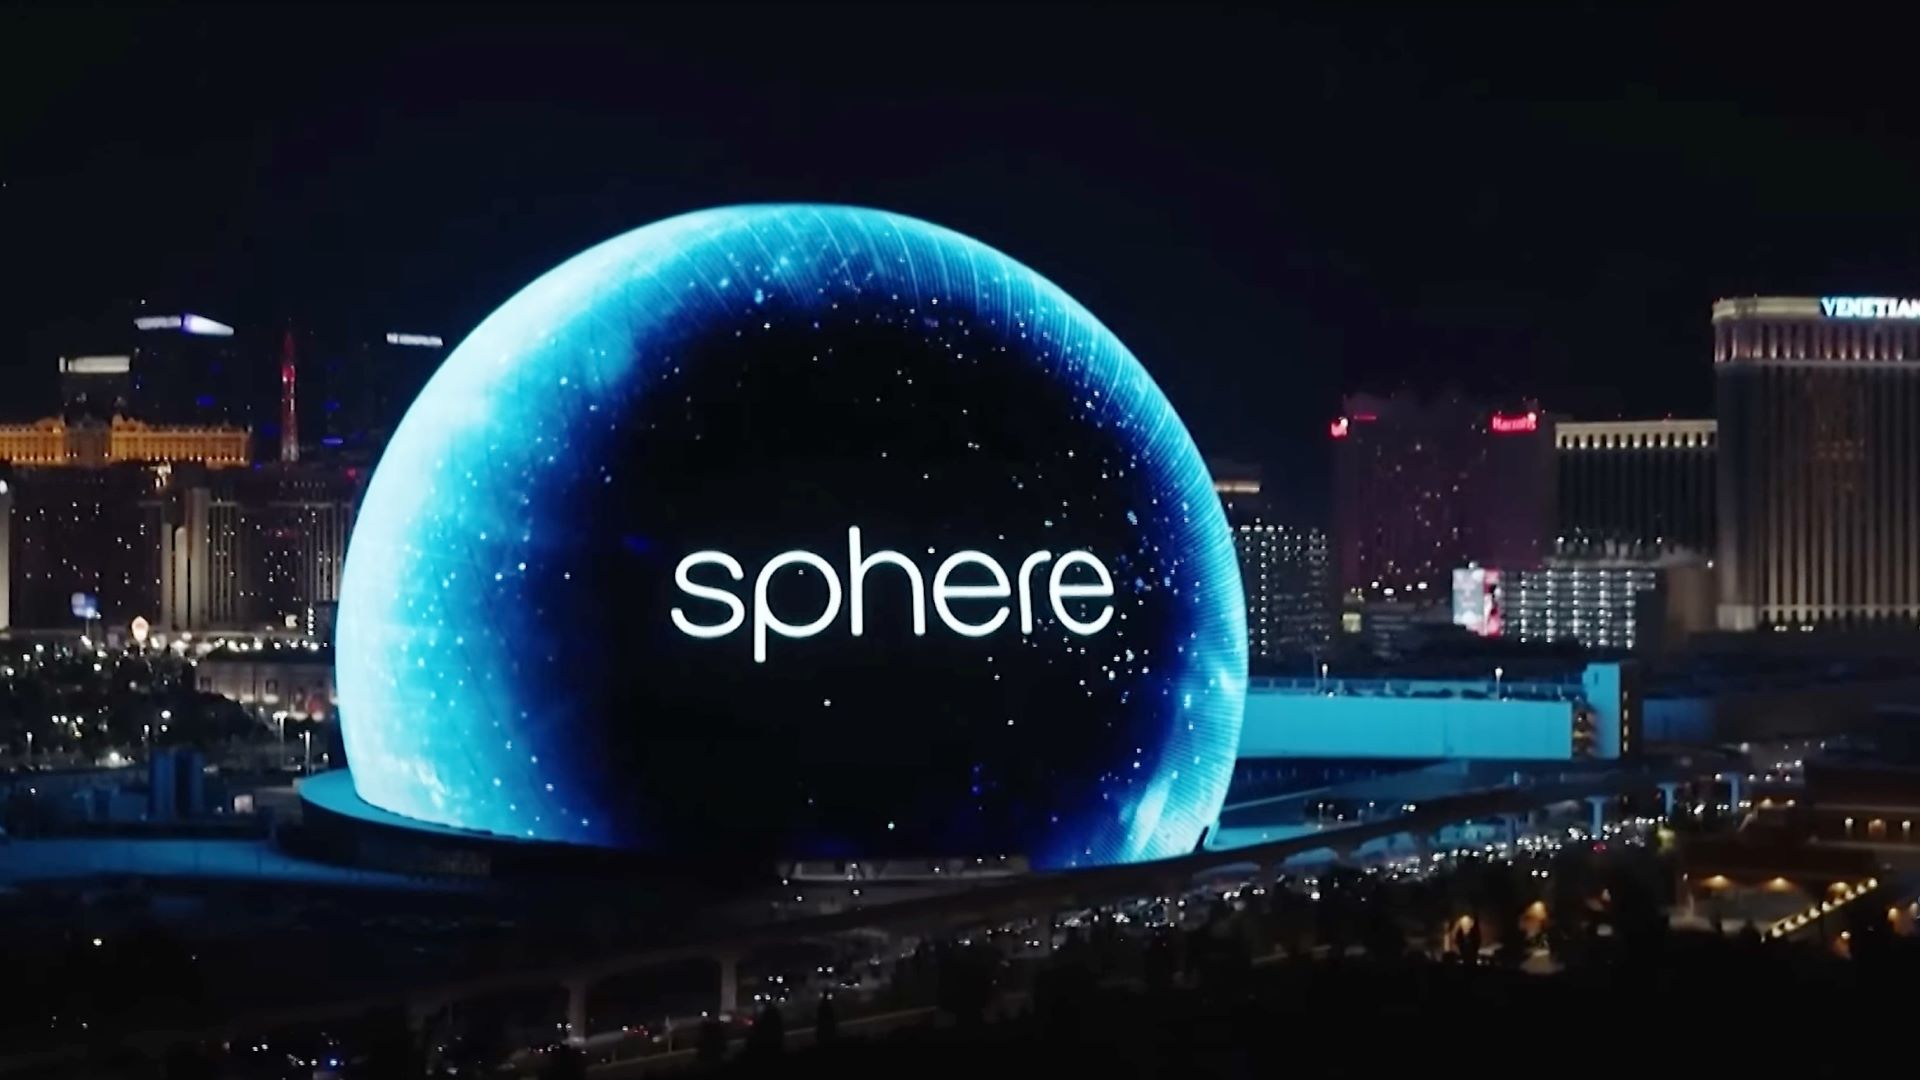 Watch this massive LED sphere in Las Vegas light up for the first